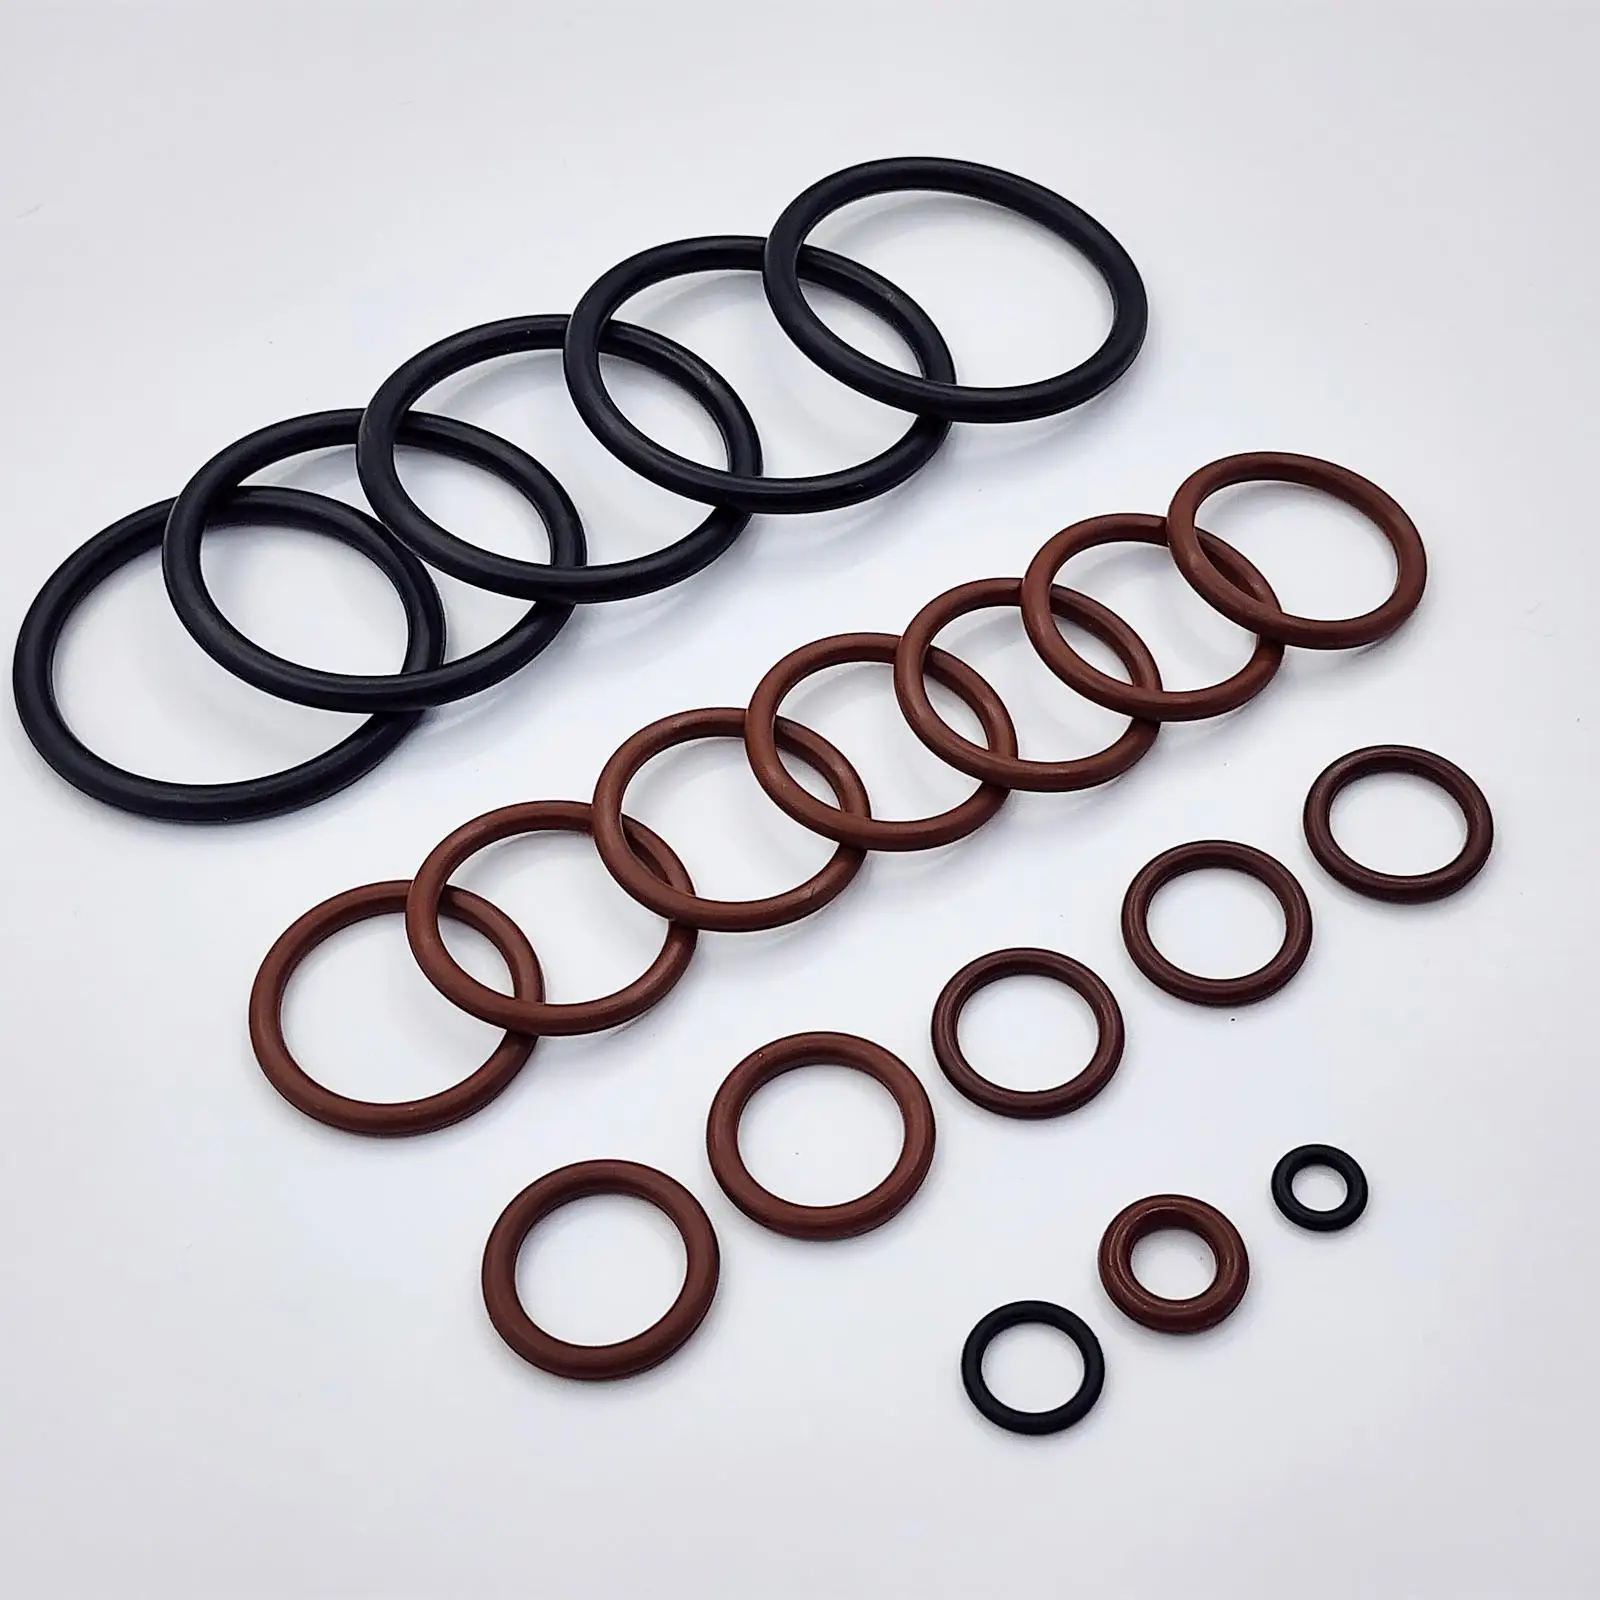 Cooling System  Kit Direct Replaces Durable Ring Assortment Kit Professional Accessory for E46 M52 M54 Automotive Hose